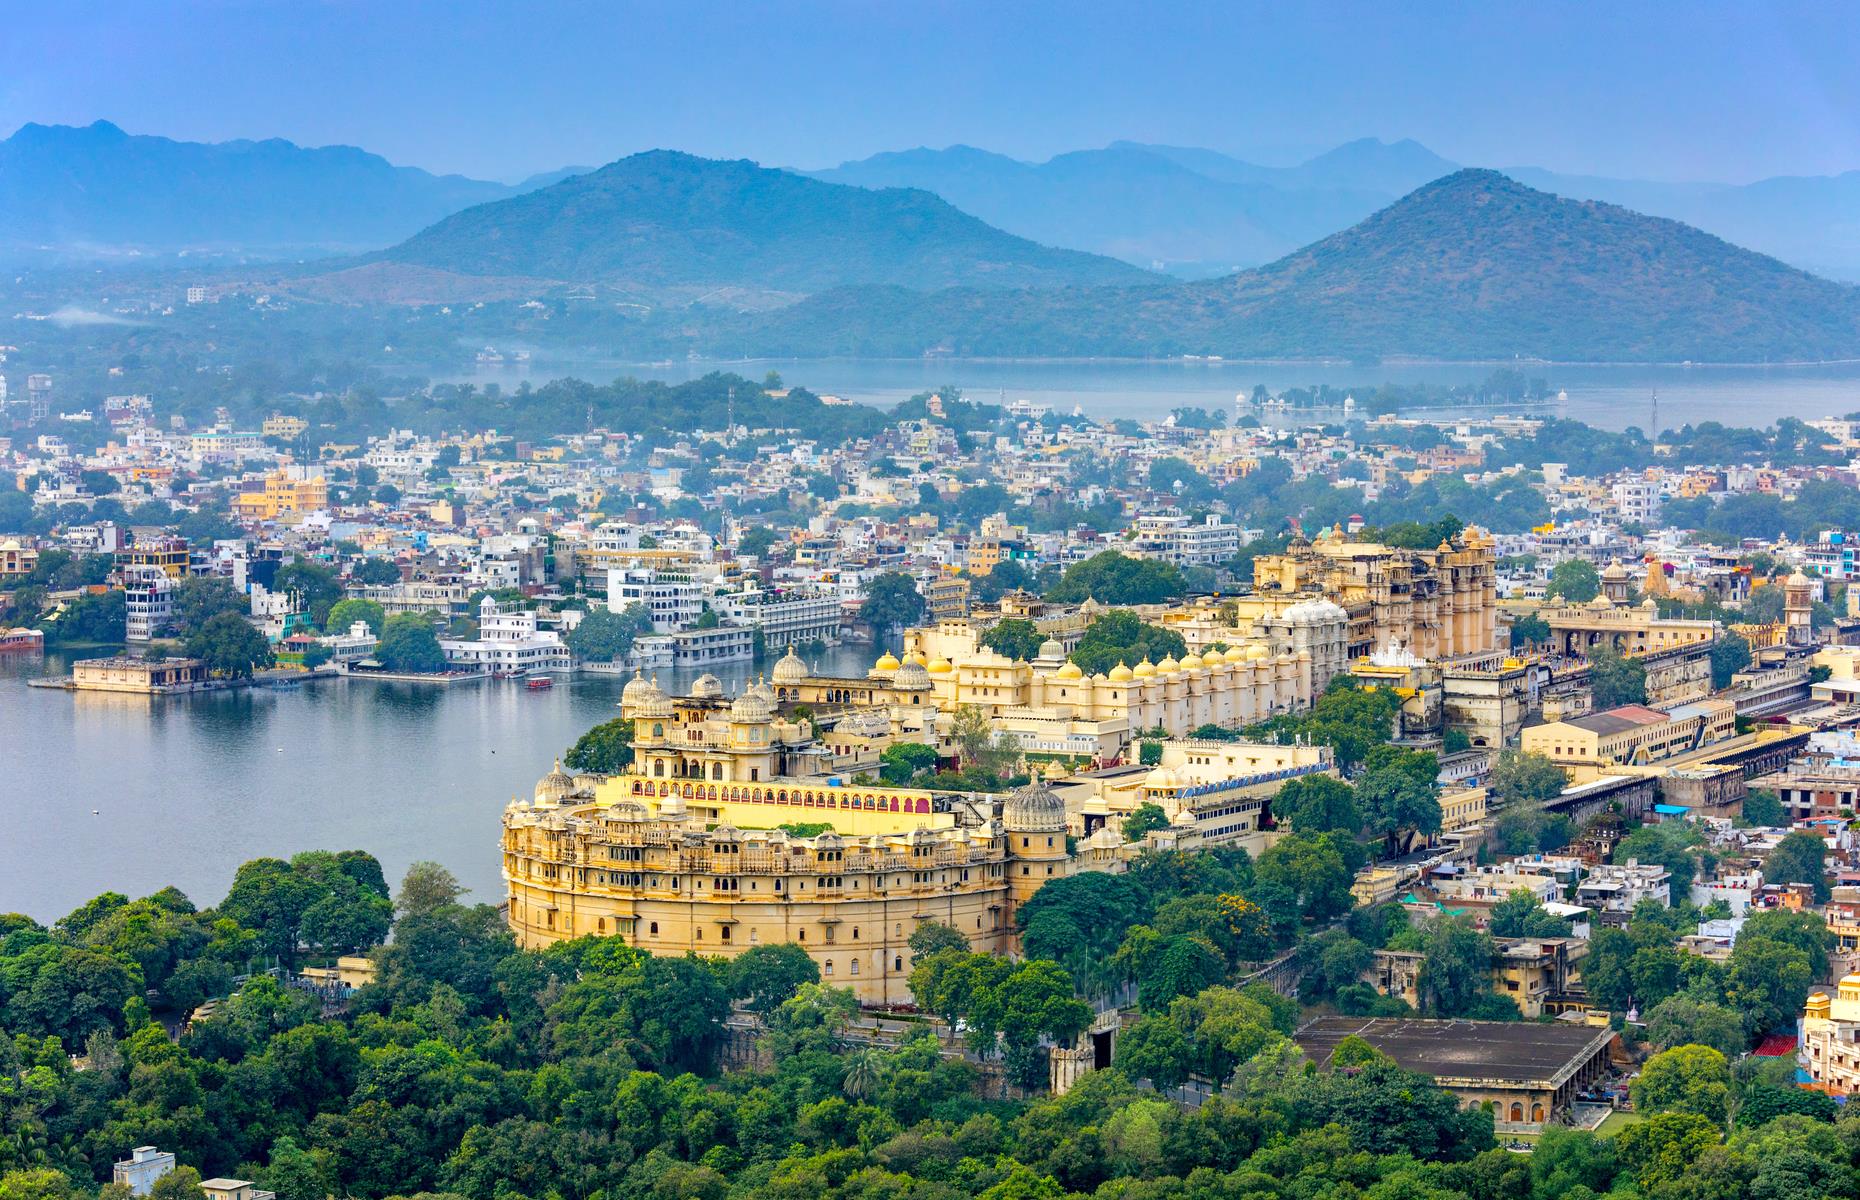 <p>A boat trip around Lake Pichola is a must – from the water you can see the many lakeside palaces, bathing ghats and temples that line its emerald green waters. The most magnificent of them all is the honey-colored City Palace, built in the 16th century and home to generations of maharanas. Made up of 11 different mahals (smaller palaces), it's the largest palace complex in Rajasthan. Losing yourself in the old city’s tangle of lanes and bustling bazaars is another essential on any Udaipur itinerary – as is taking a breather in its serene gardens such as the Saheliyon Ki Bari on the banks of Fateh Sagar Lake.</p>